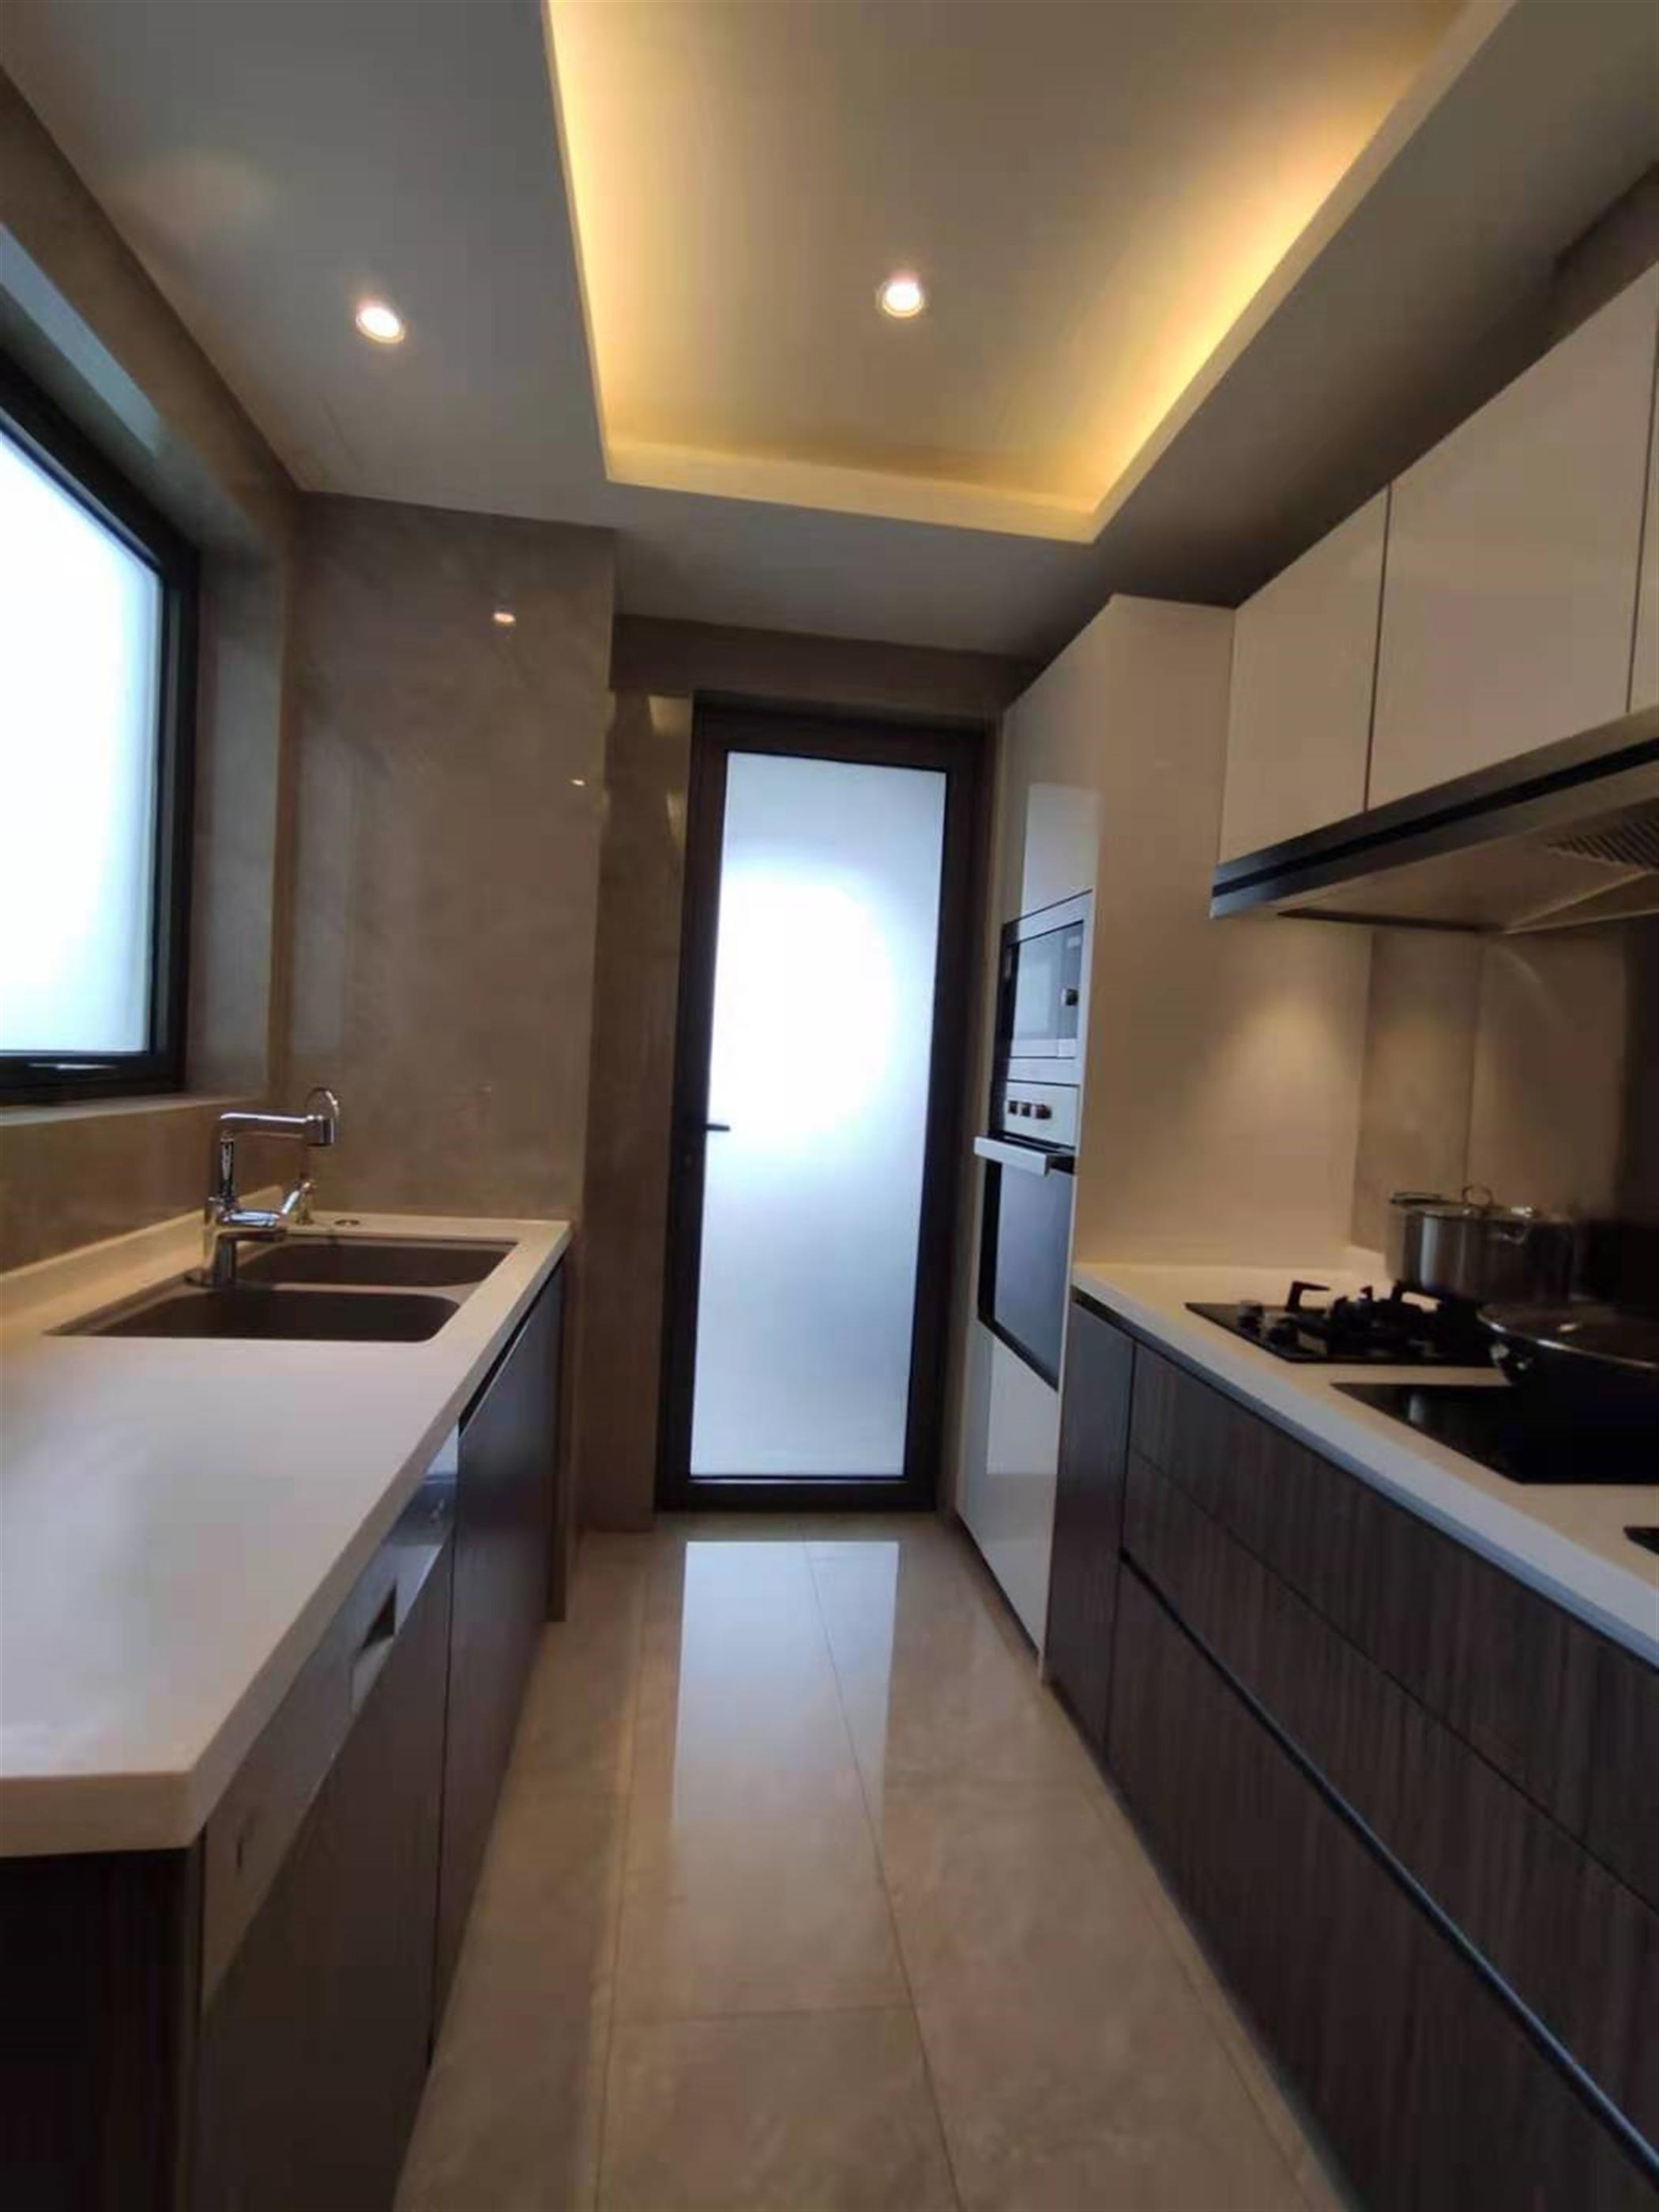 Kitchen Luxurious FFC 3BR+Office Service Apartment nr LN 1/9/10/12 for Rent in Shanghai